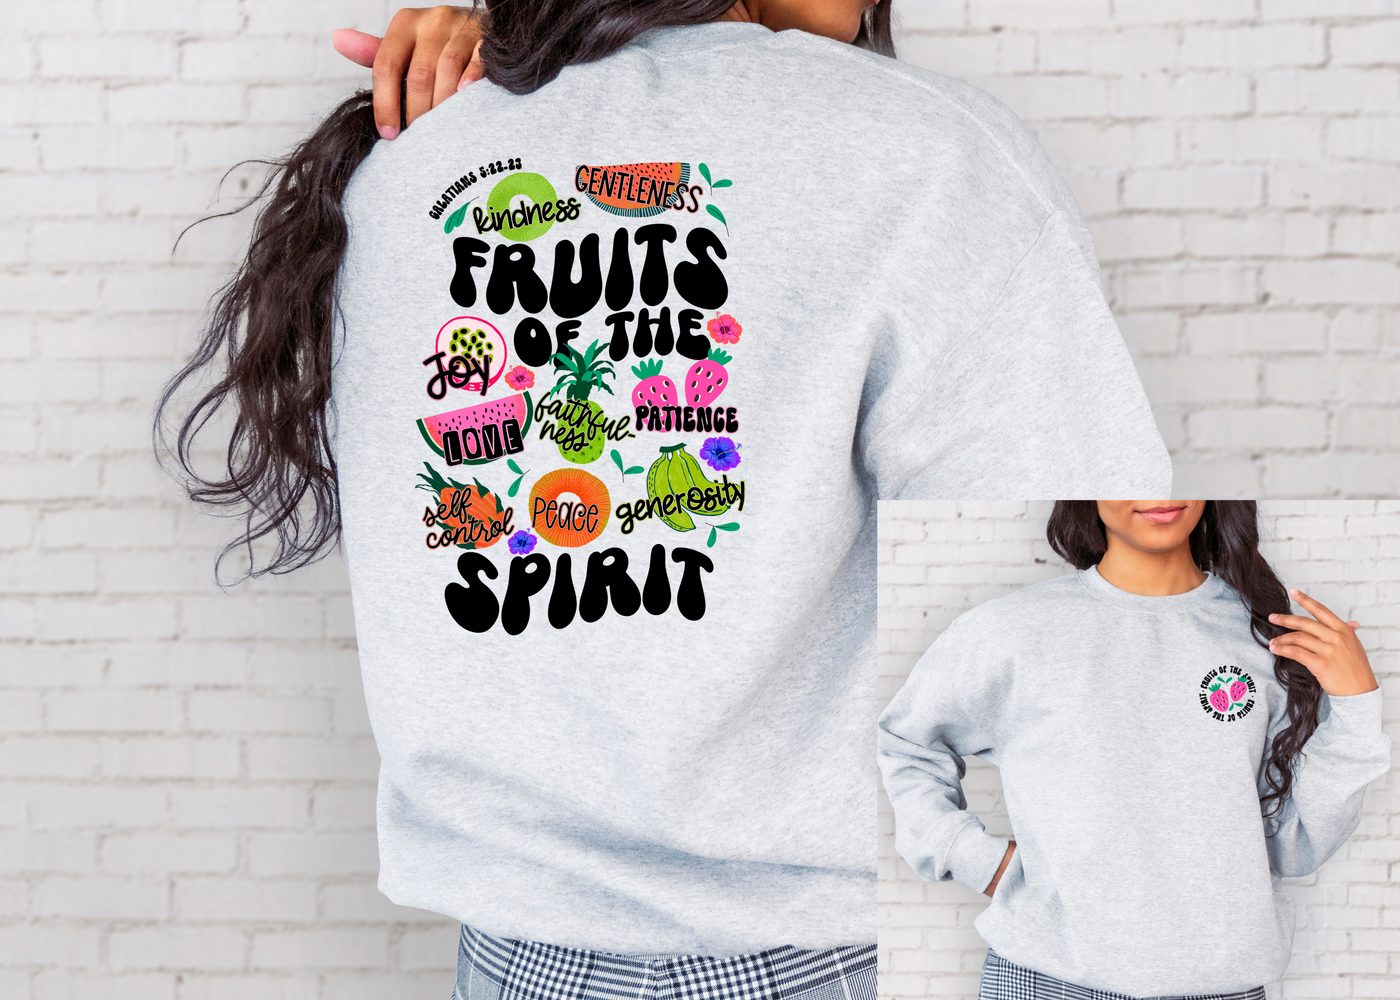 Fruits of the spirit (front and back)